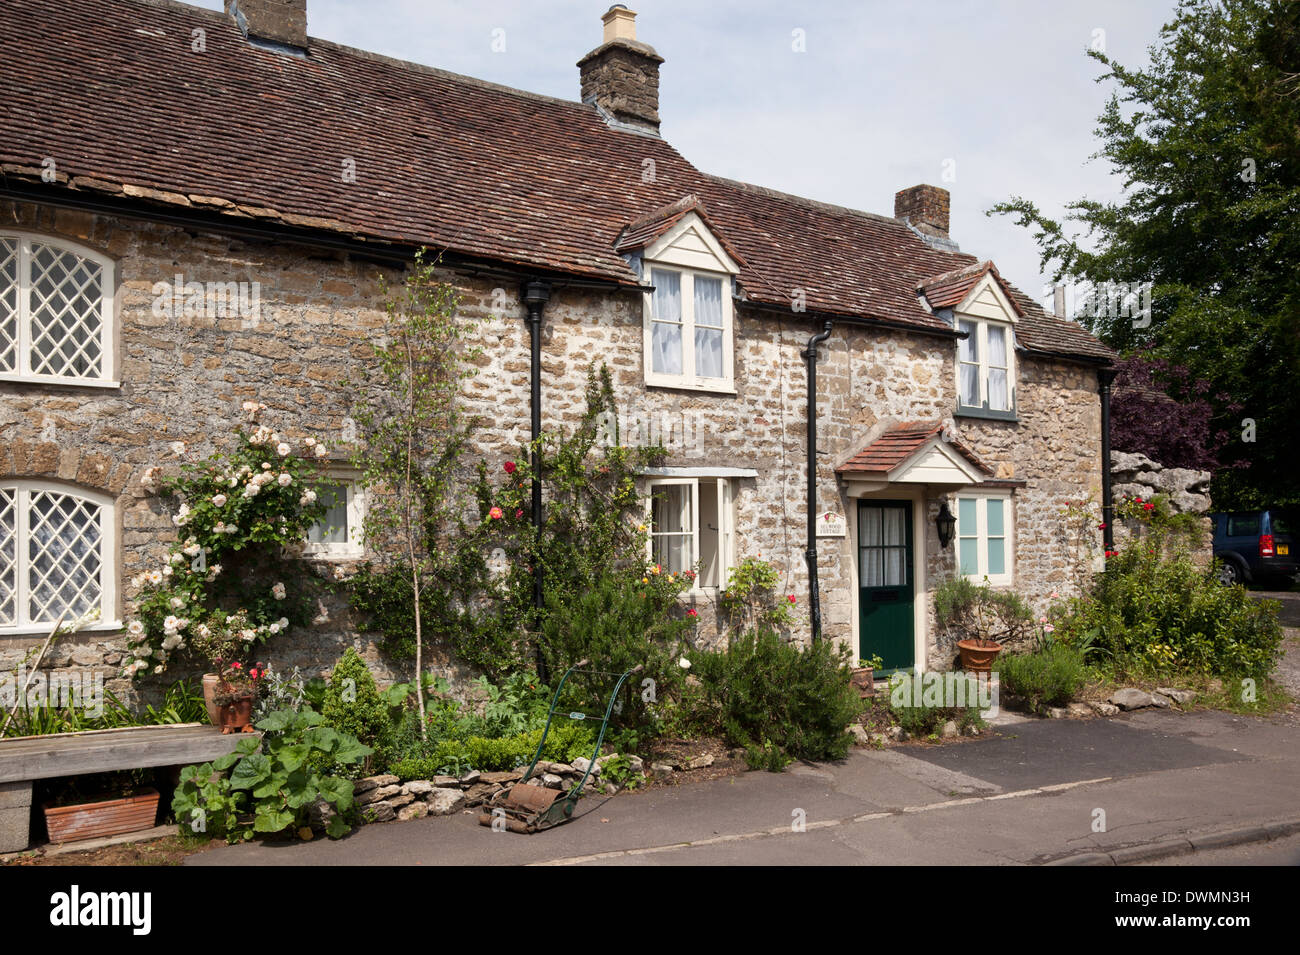 Stone built terrace house in the village of Mells, Someret, England, UK Stock Photo